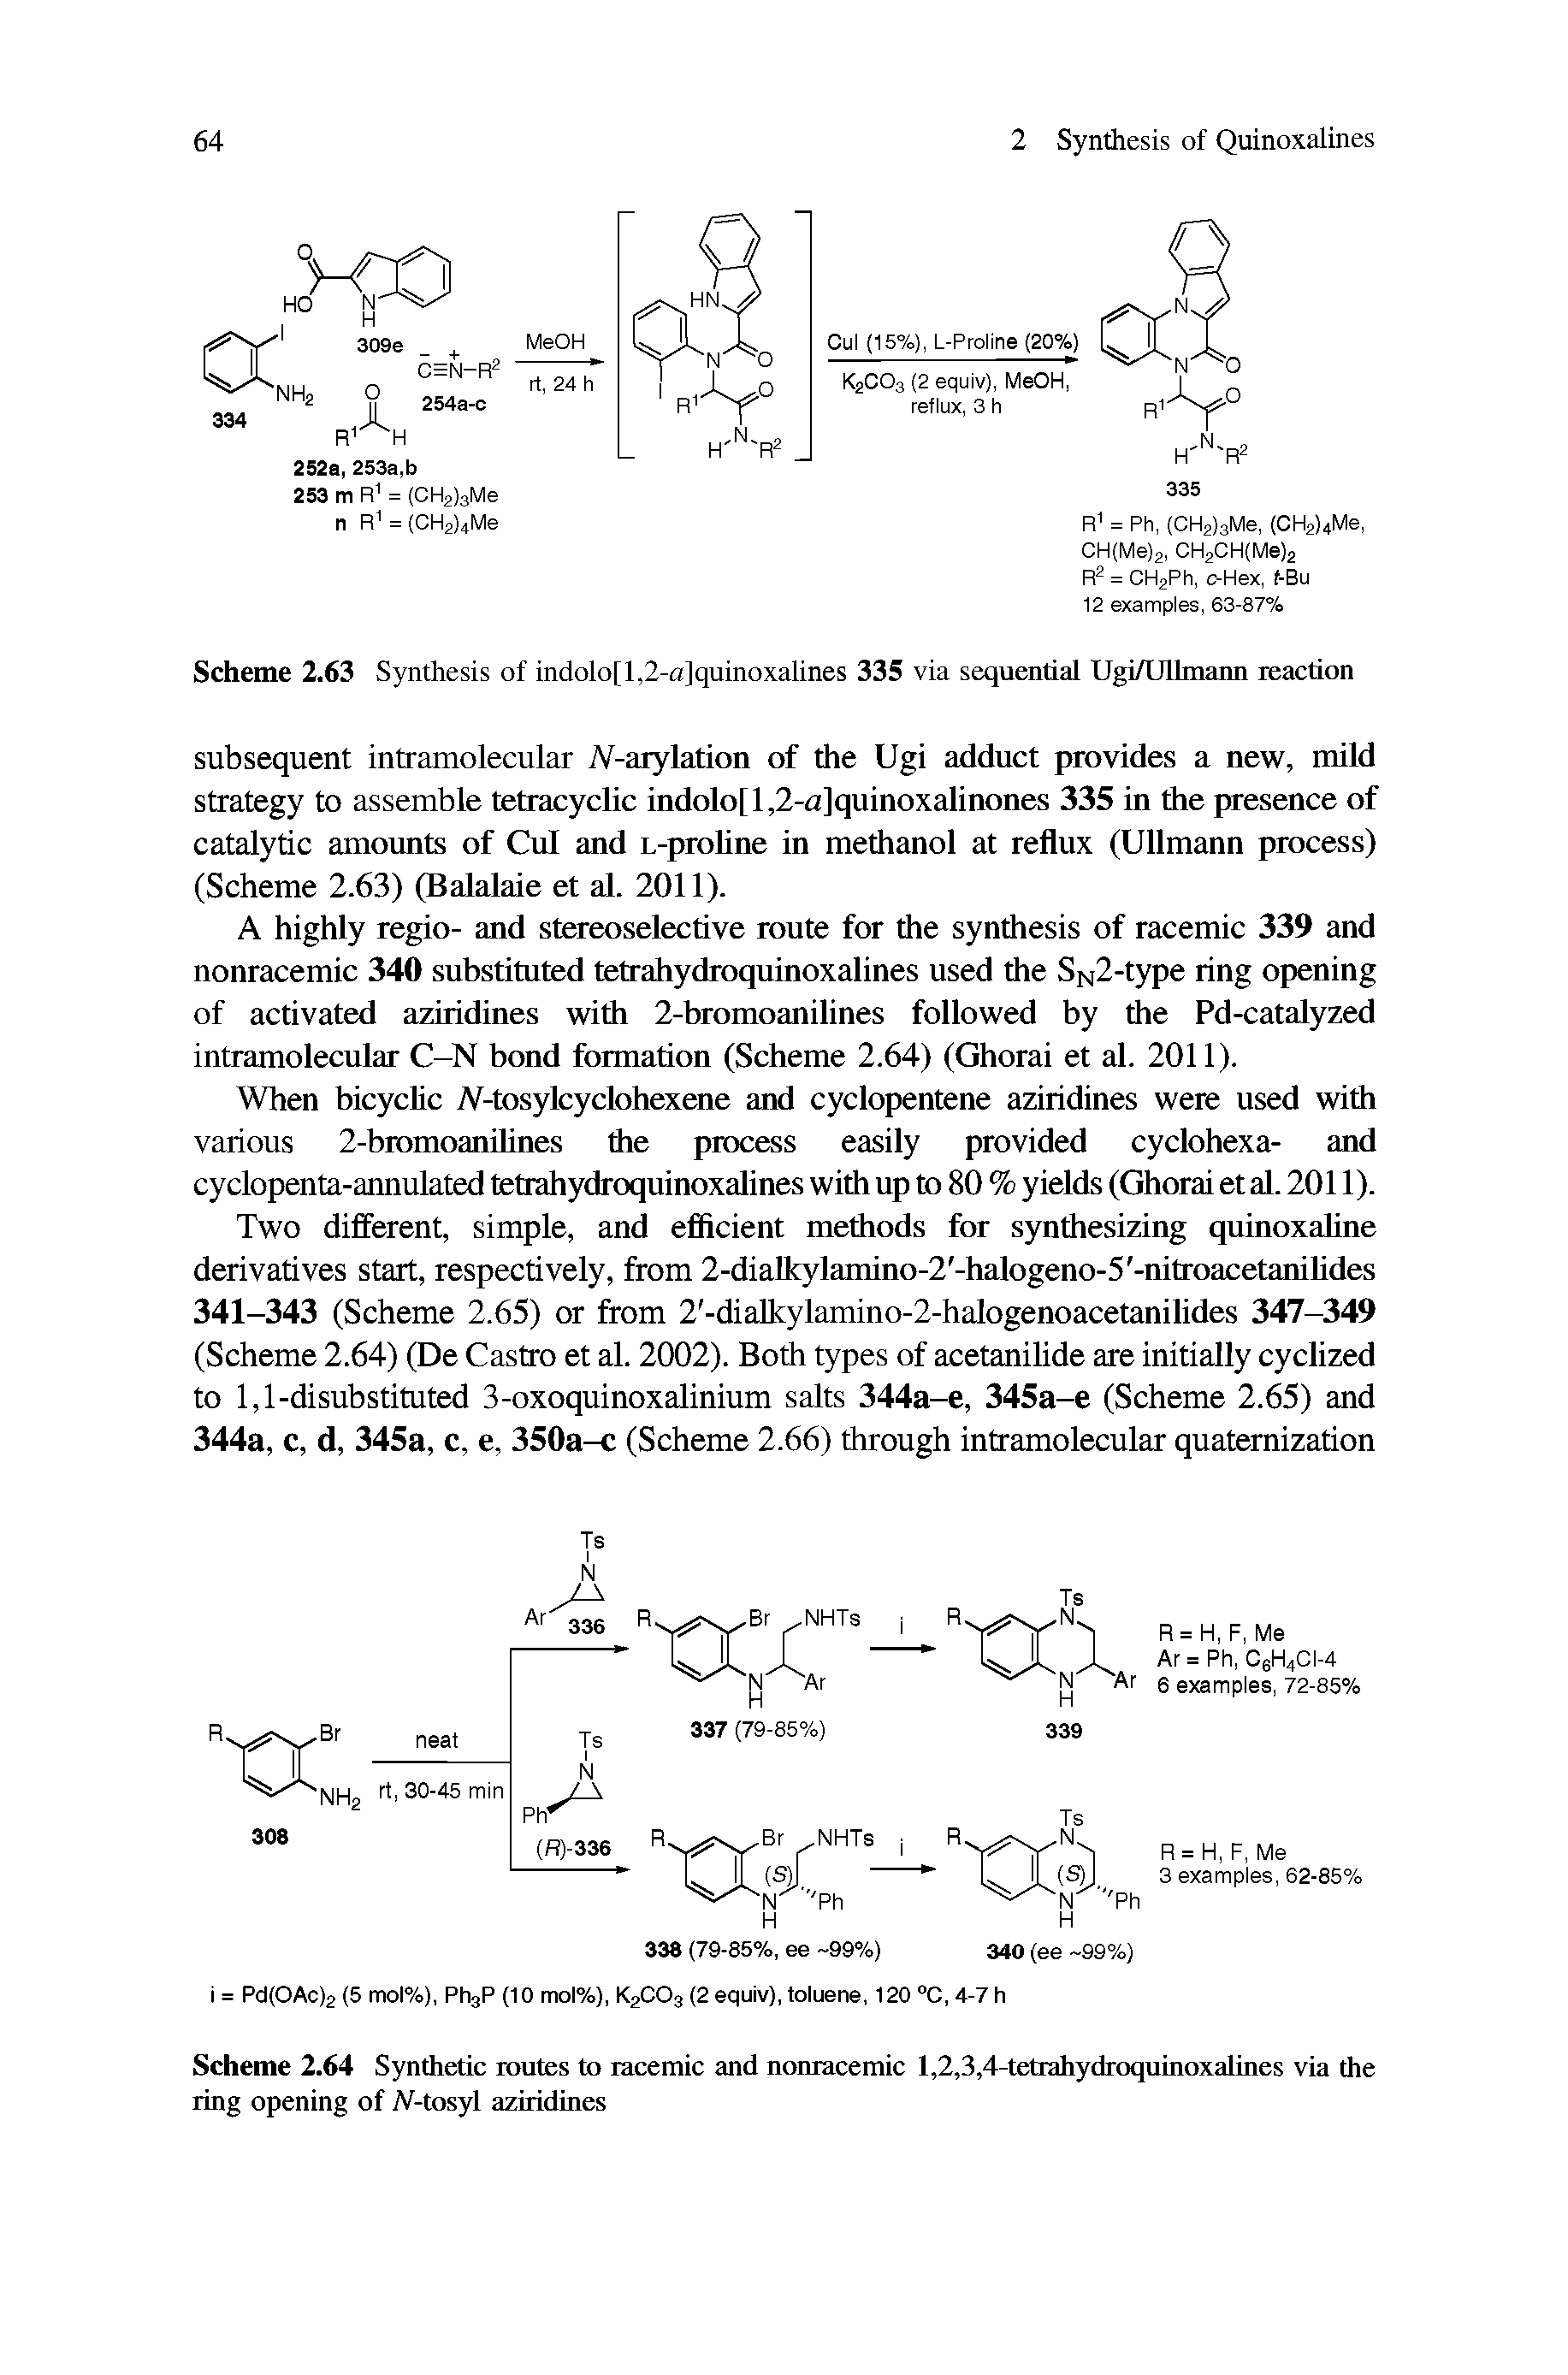 Scheme 2.64 Synthetic routes to racemic and nonracemic 1,2,3,4-tetrahydroquinoxalines via the ring opening of A -tosyl aziridines...